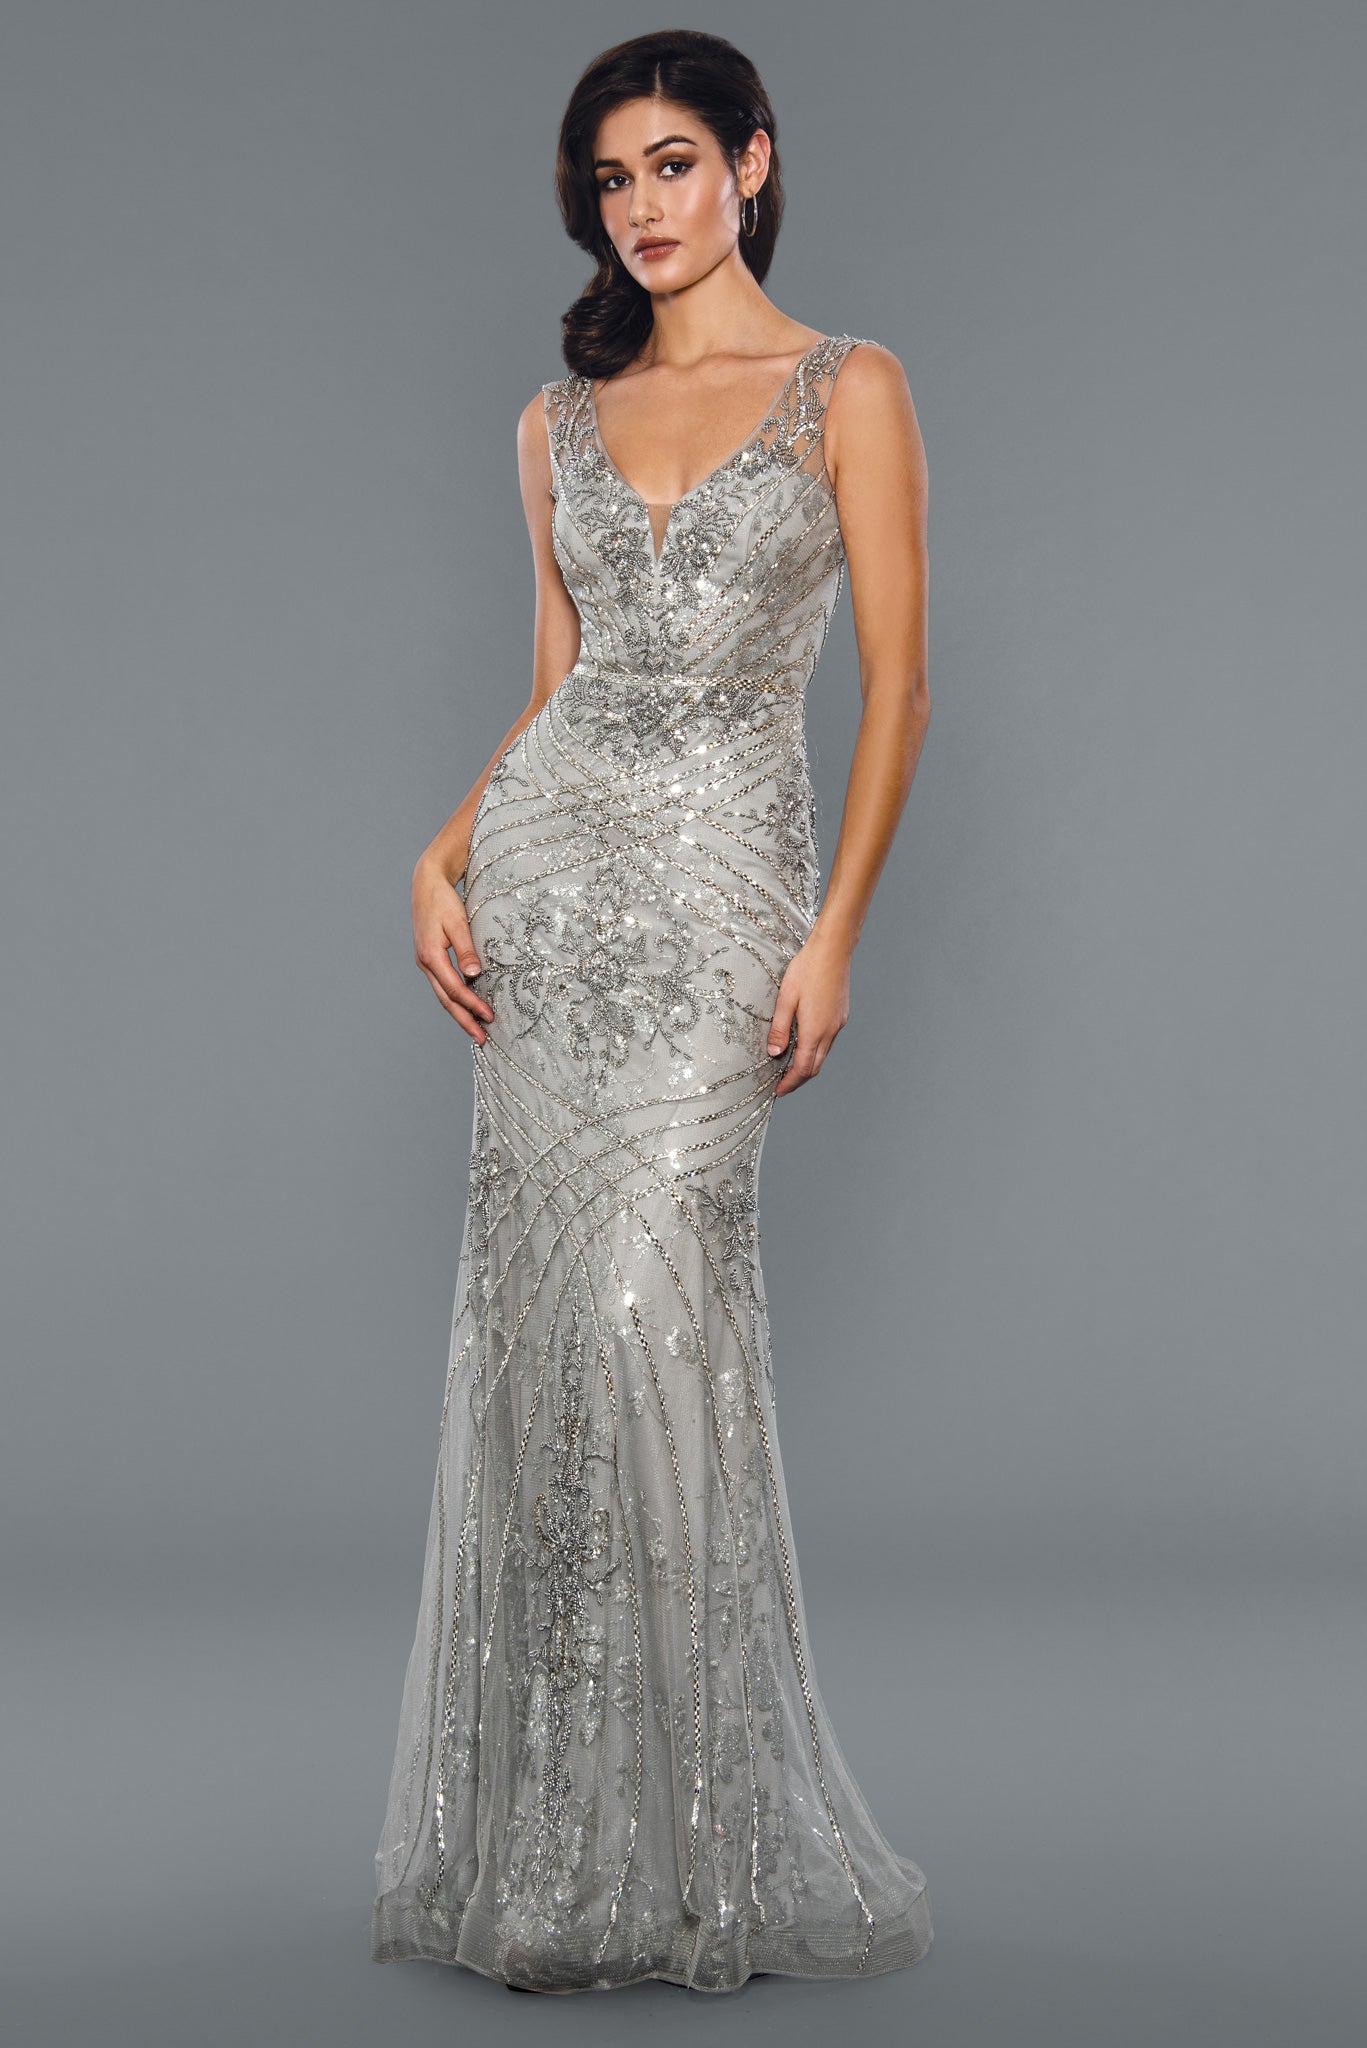 Stella Couture 21048 Long beaded Rhinestone embellished formal dress prom pageant. Stella Couture's 21048 Long Shimmer Beaded Evening Dress is the perfect choice for formal occasions. Crafted with intricate beadwork detail, this figure-flattering gown features a full length design with a classic scoop neckline and tulle-lined skirt for added movement. A breathtaking choice for these special occasions